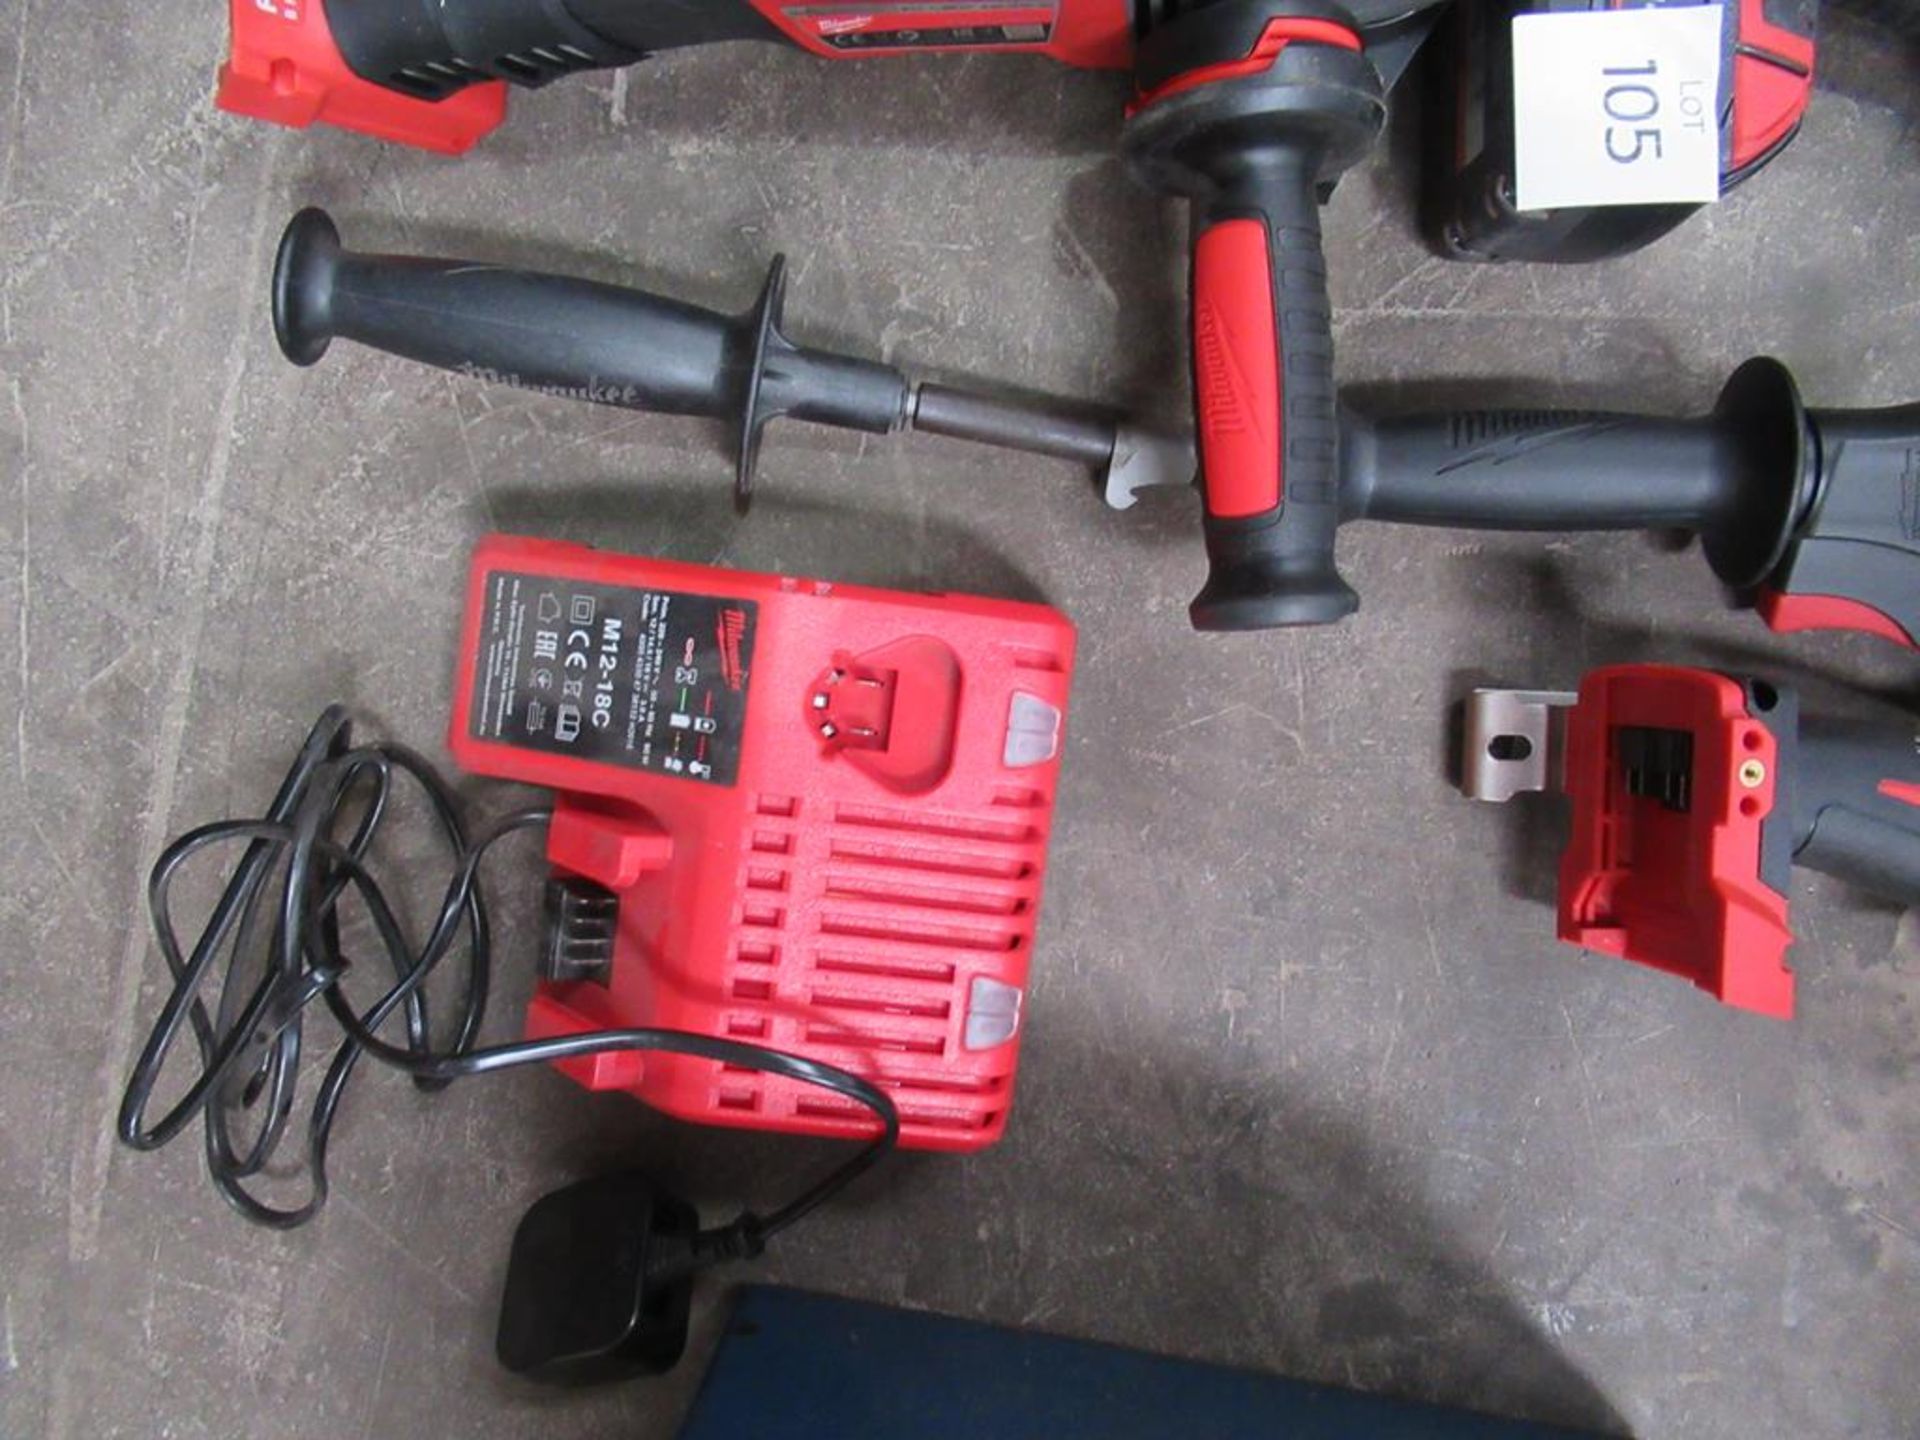 Milwake Cordless Power Tools to include 2 x drill and angle grinder, 1 x battery and charger - Image 5 of 5